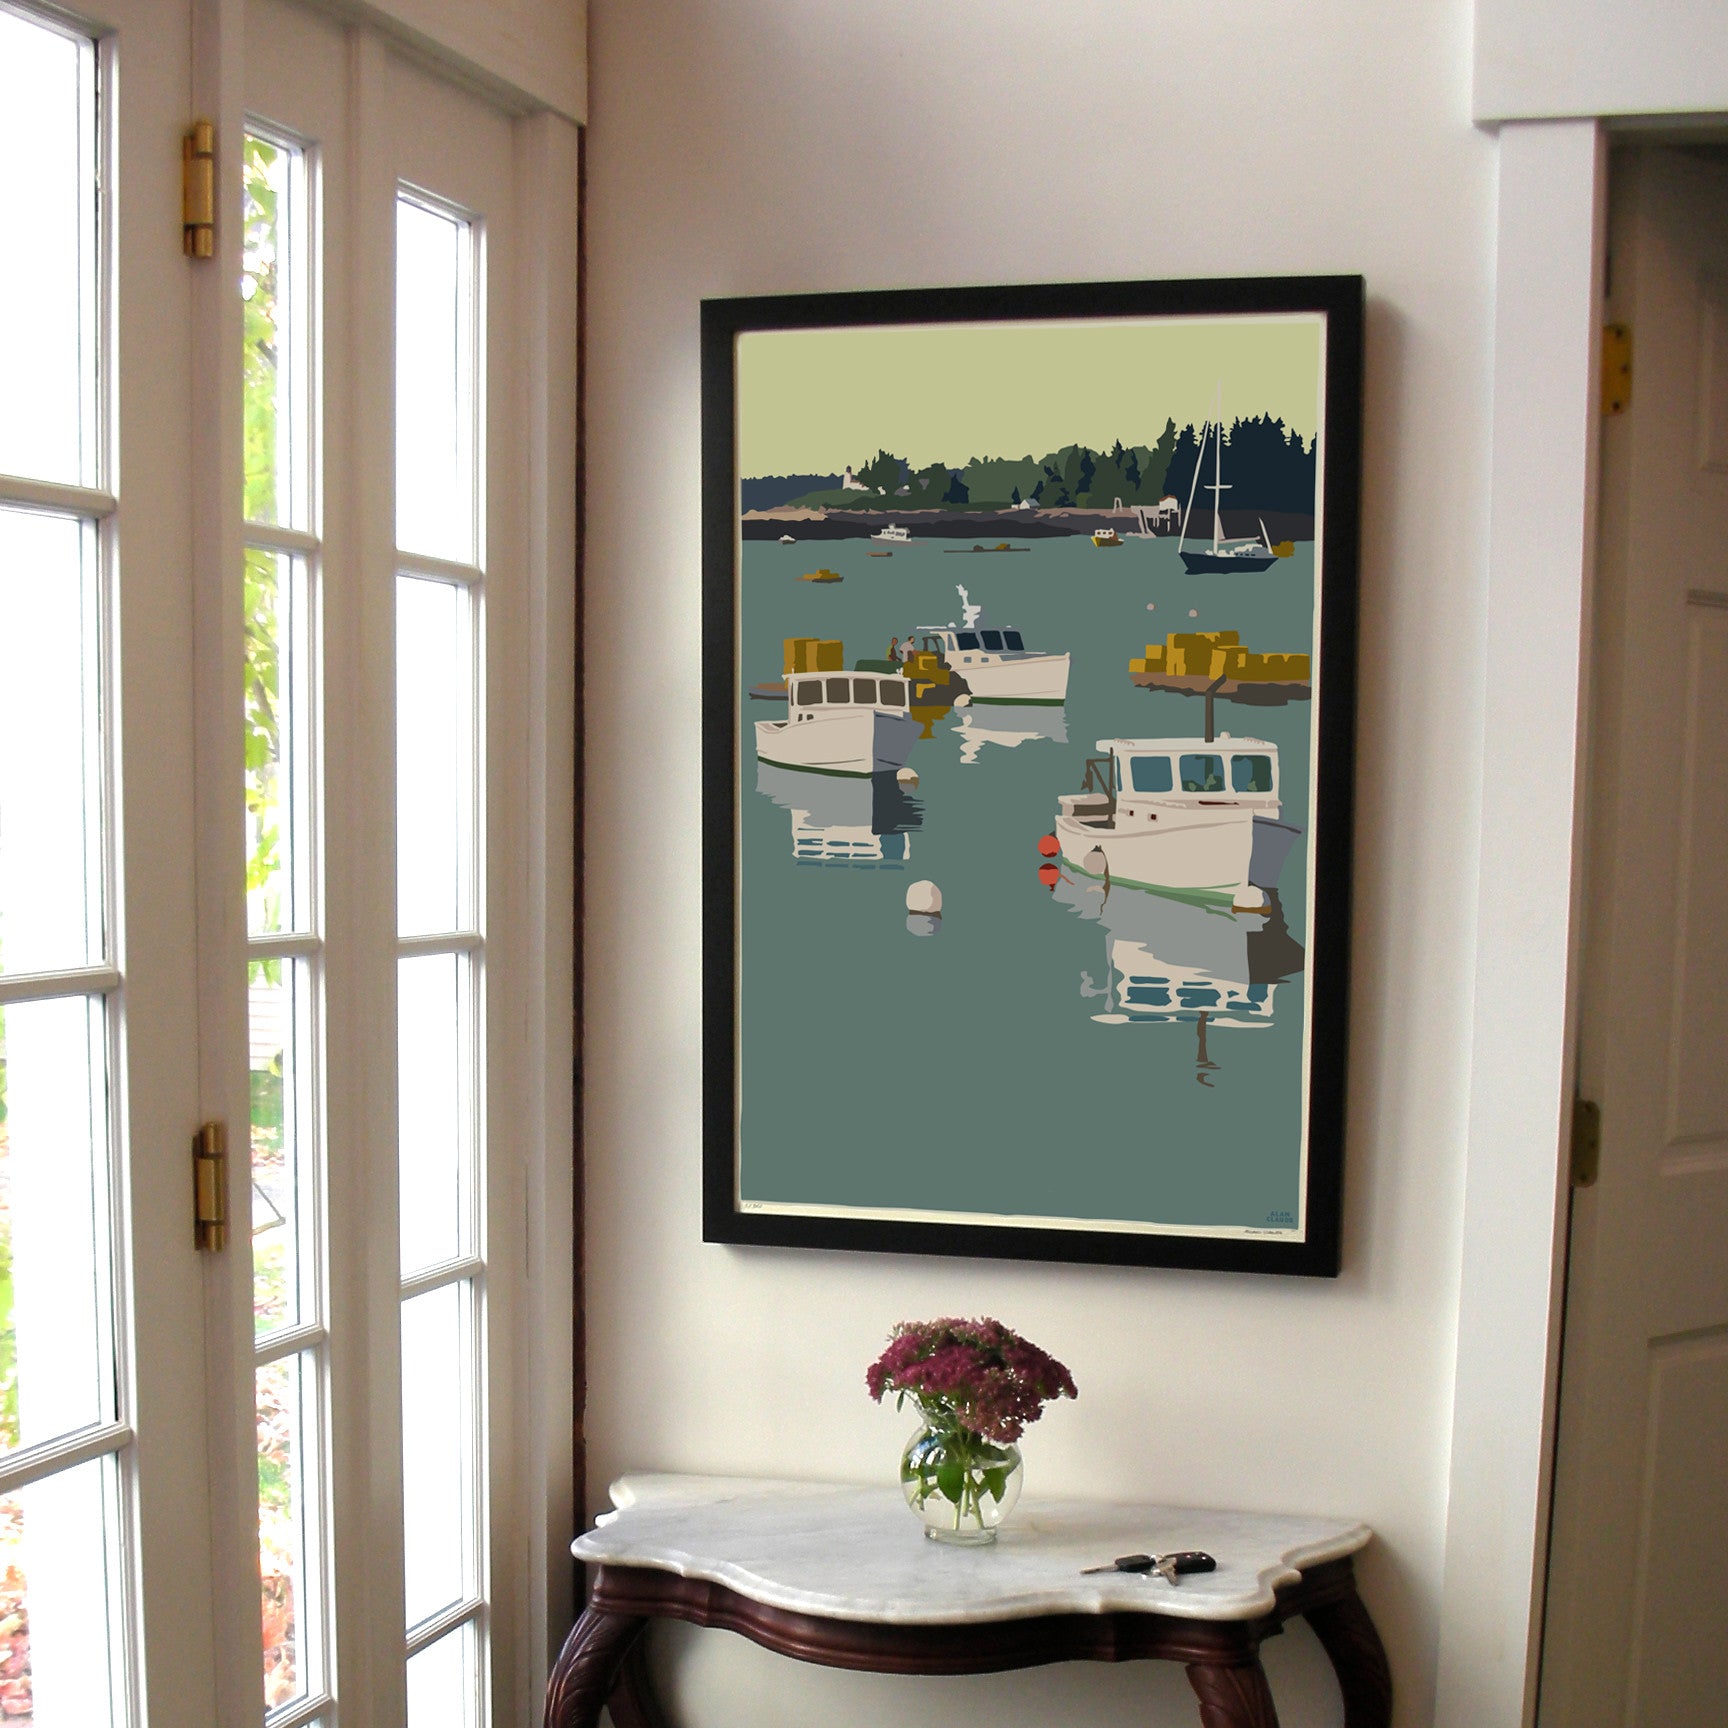 Lobster Boats on a Sunday Morning Art Print 24" x 36" Framed Wall Poster By Alan Claude  - Maine